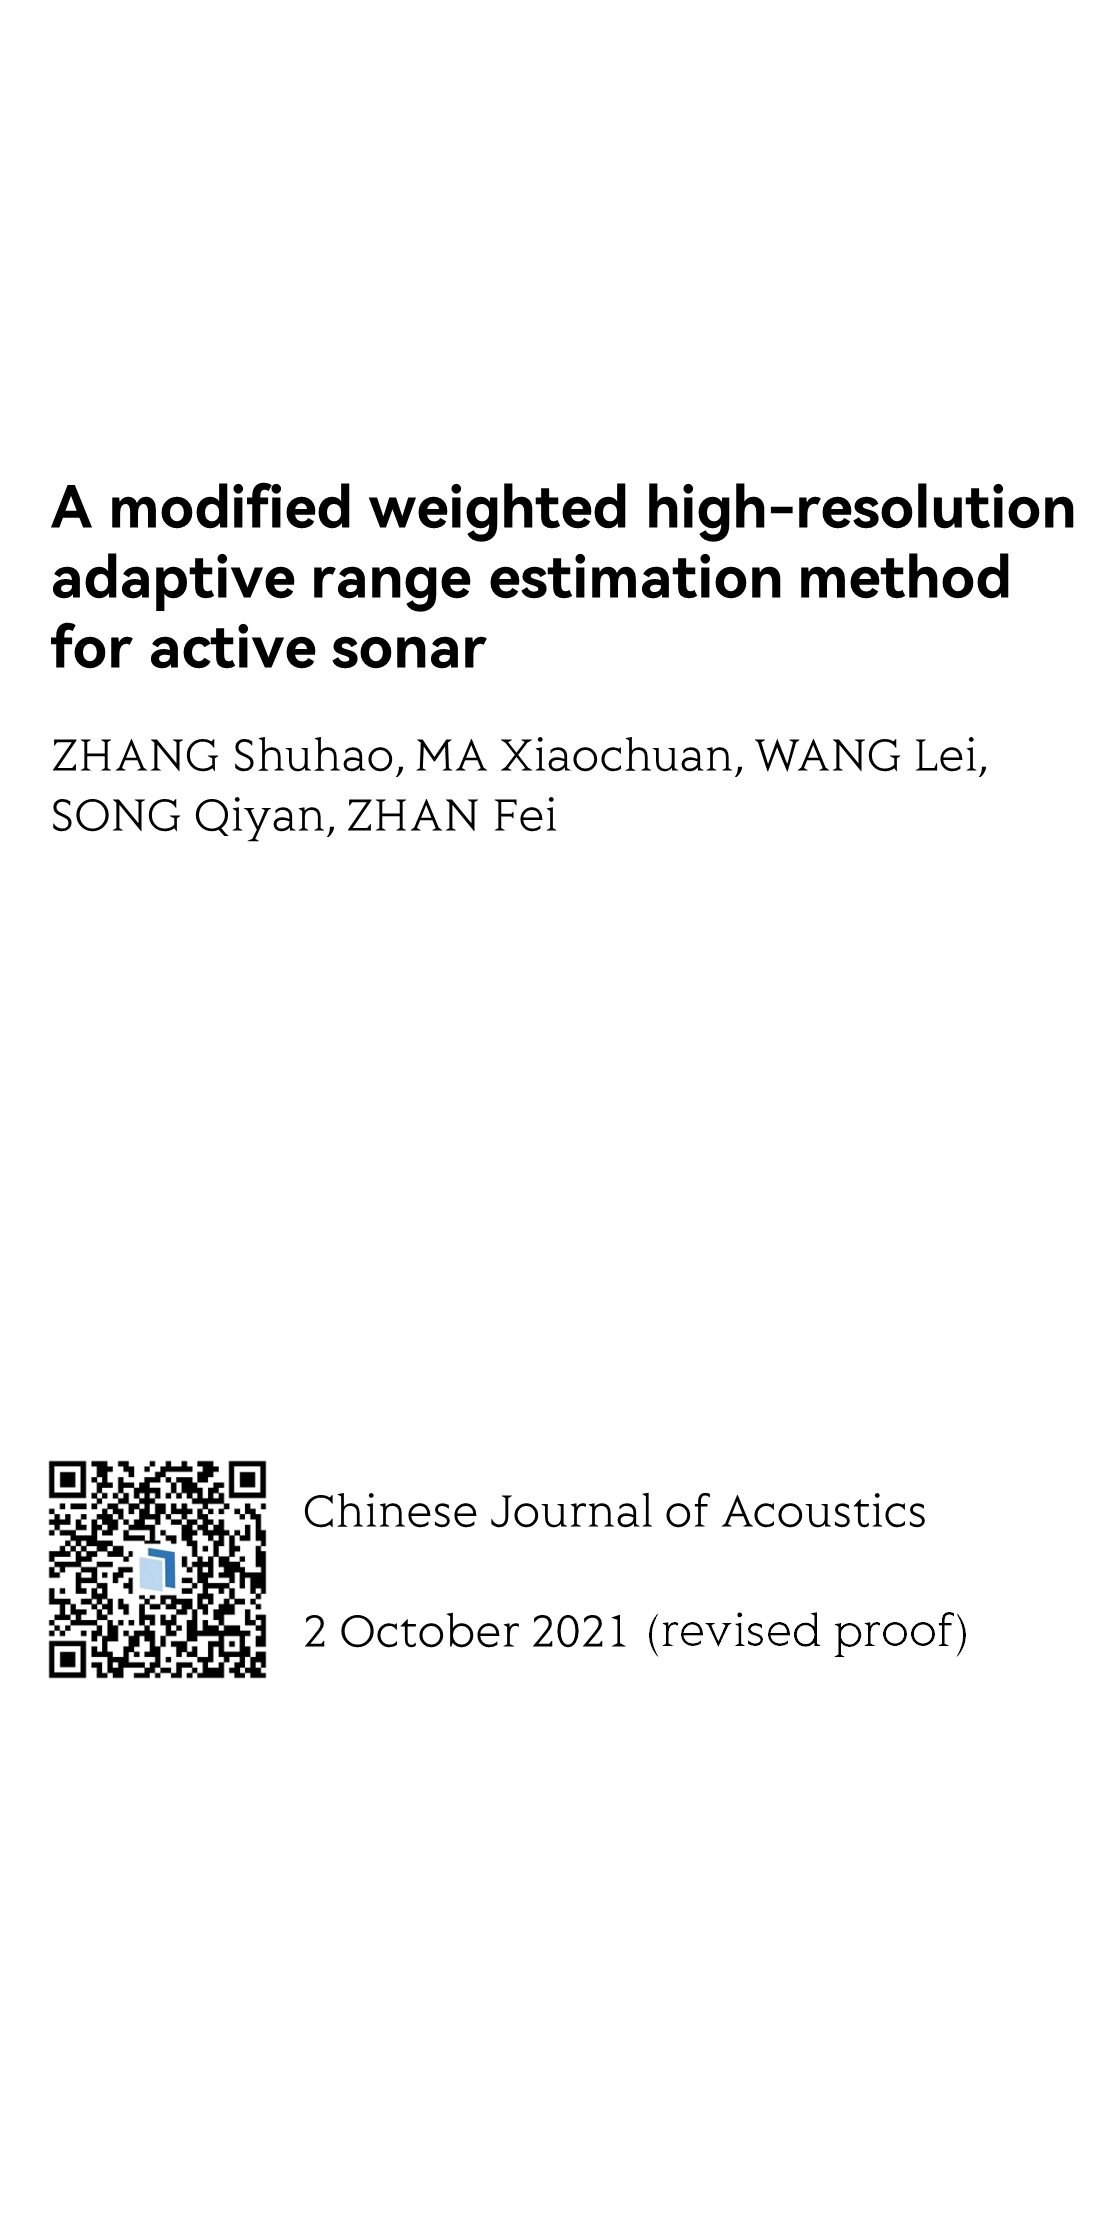 A modified weighted high-resolution adaptive range estimation method for active sonar_1